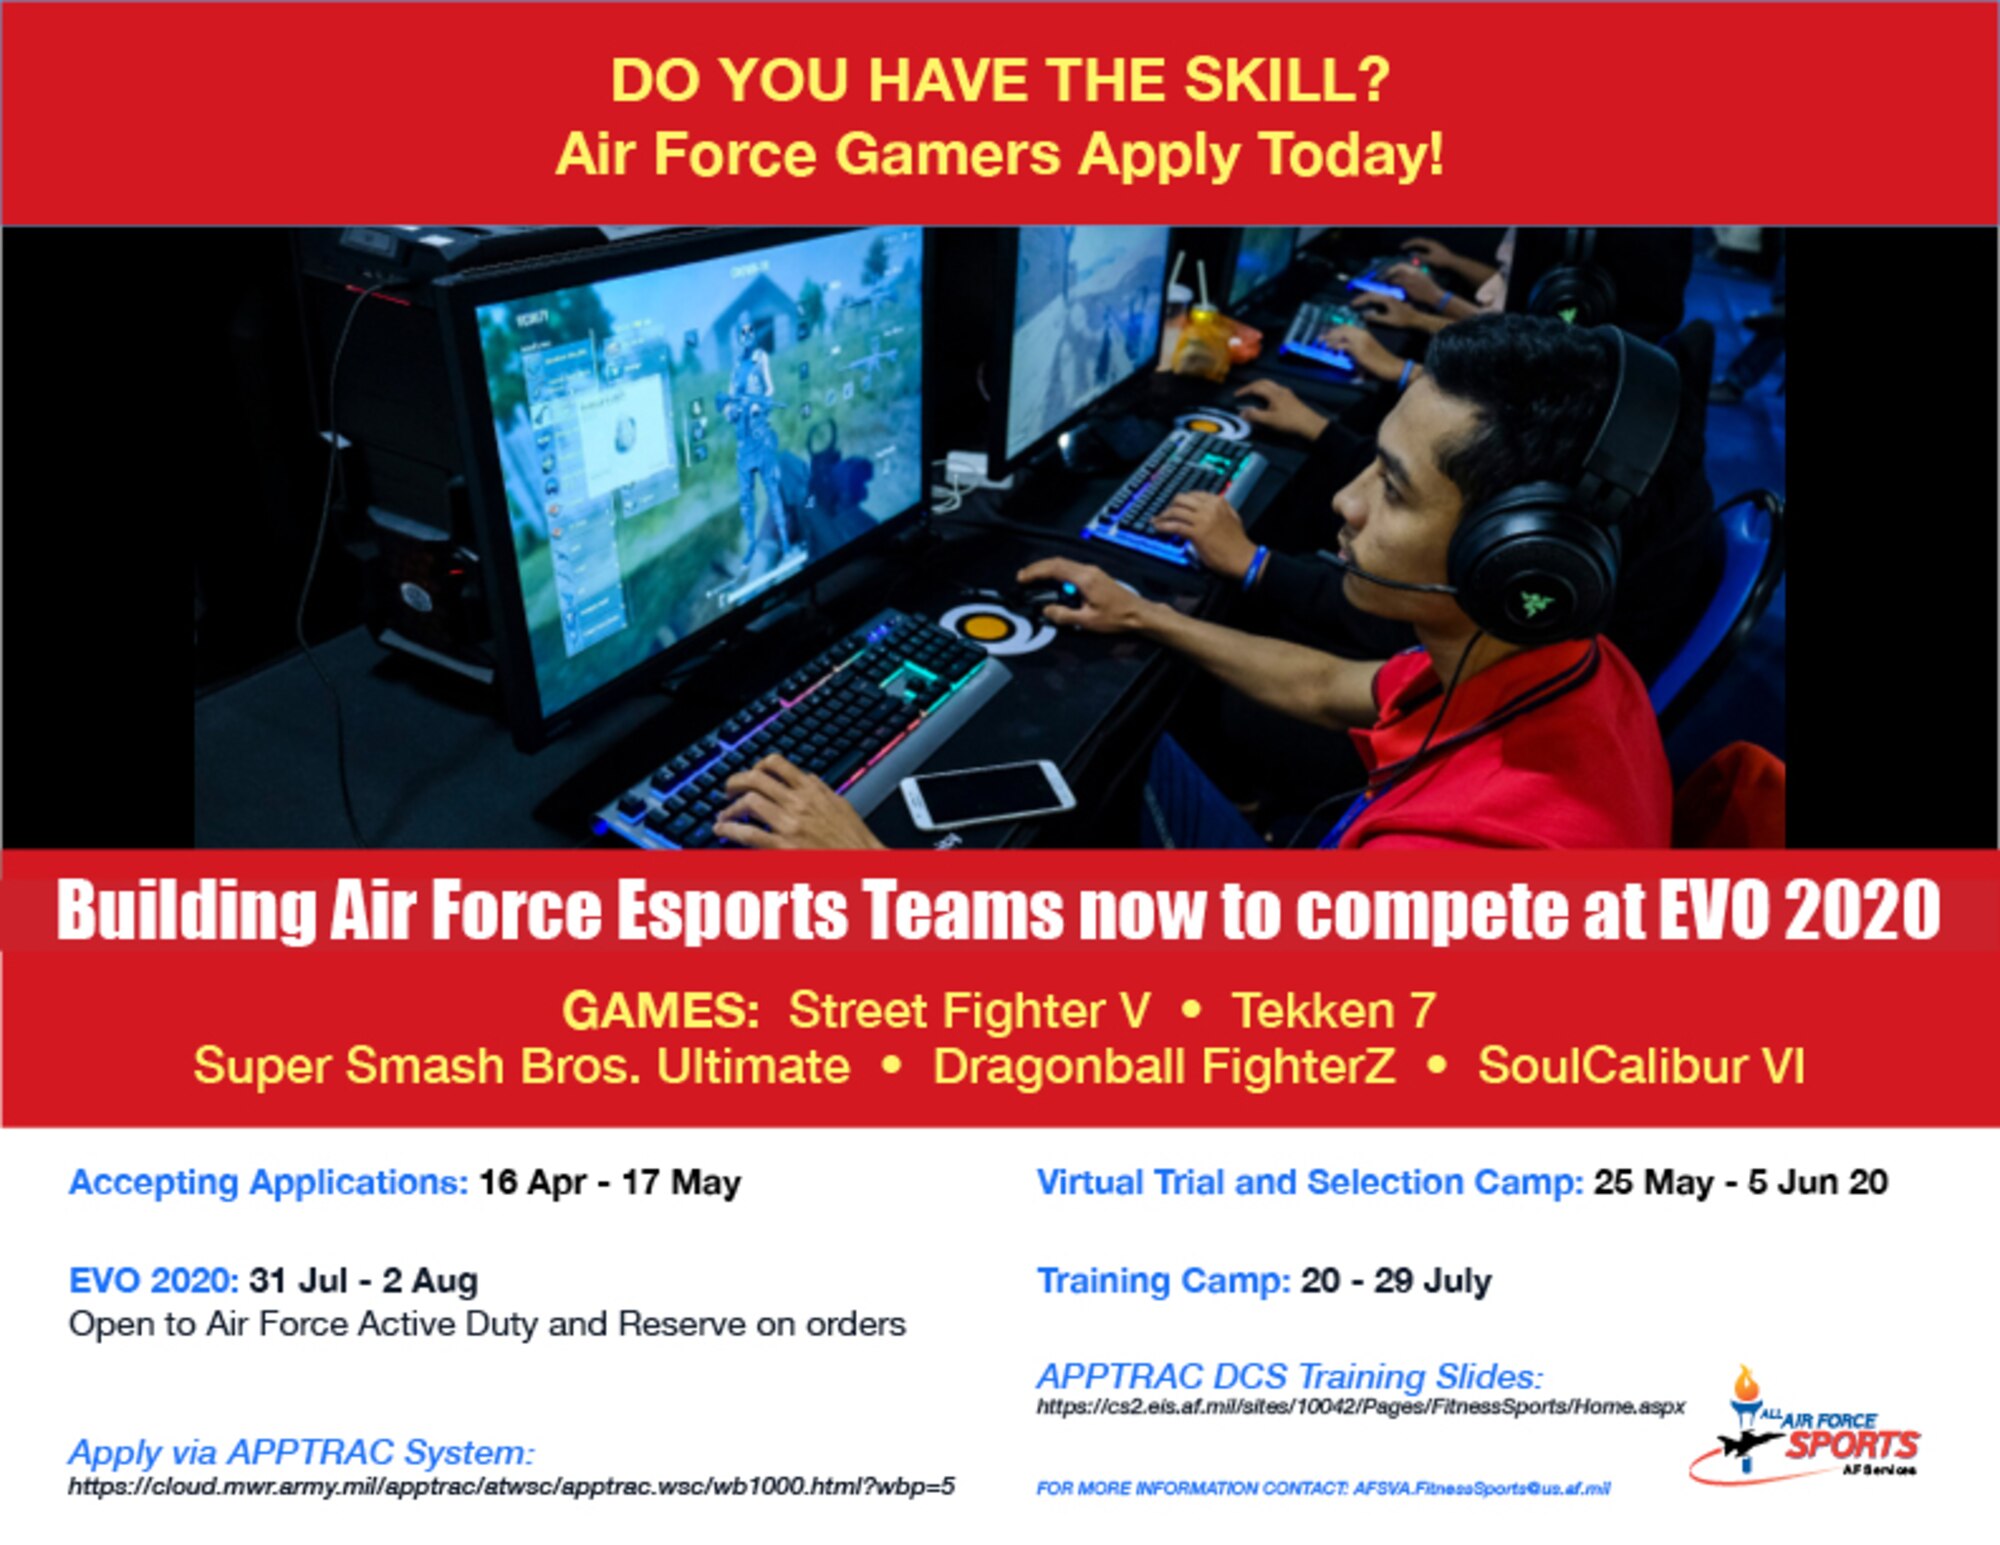 EVO 2020 Air Force gaming recruiting poster. (AFSVC graphic)